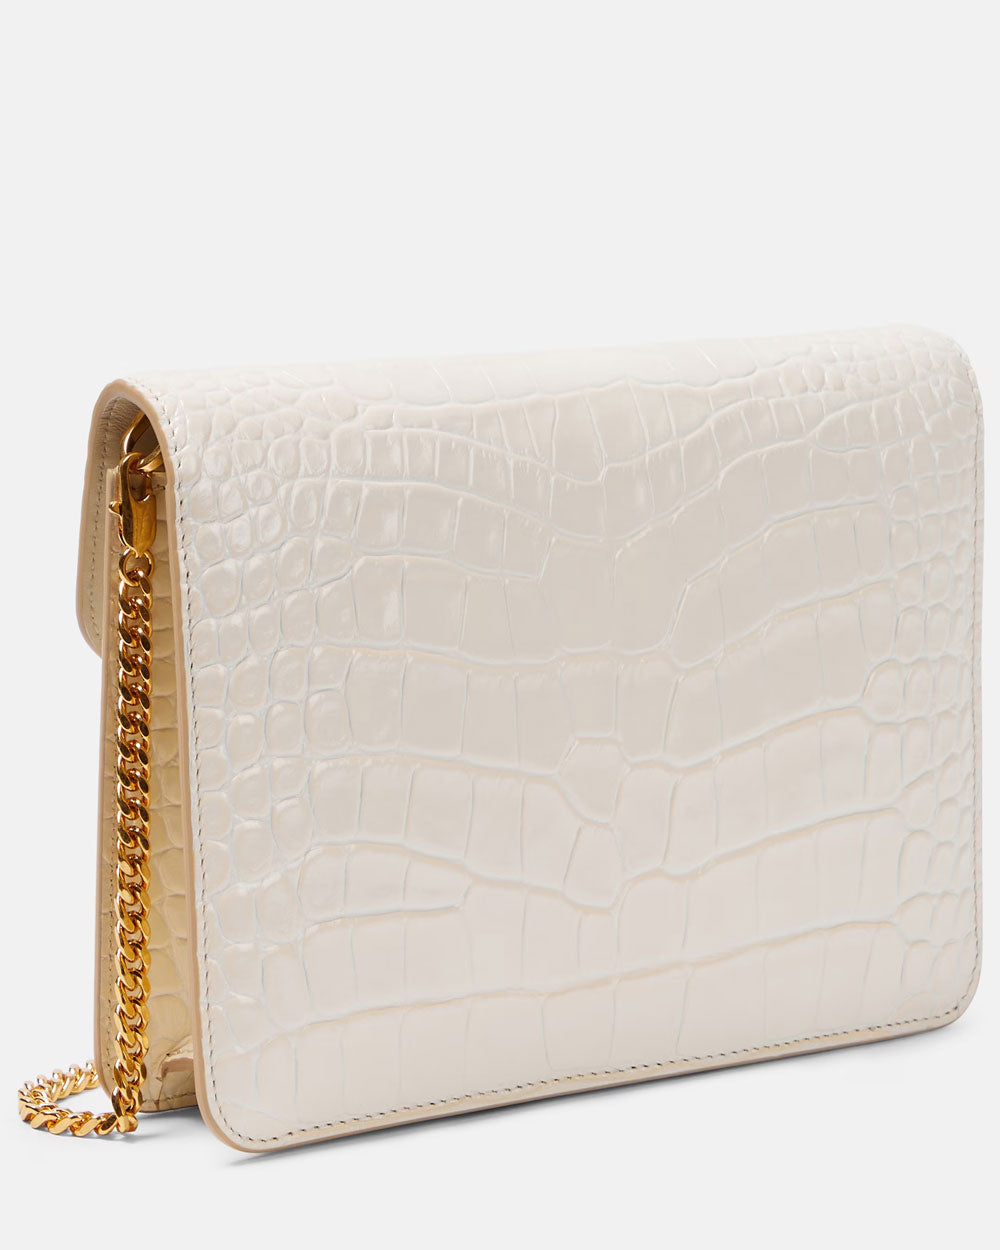 Small Whitney Croc Shoulder Bag in Ivory